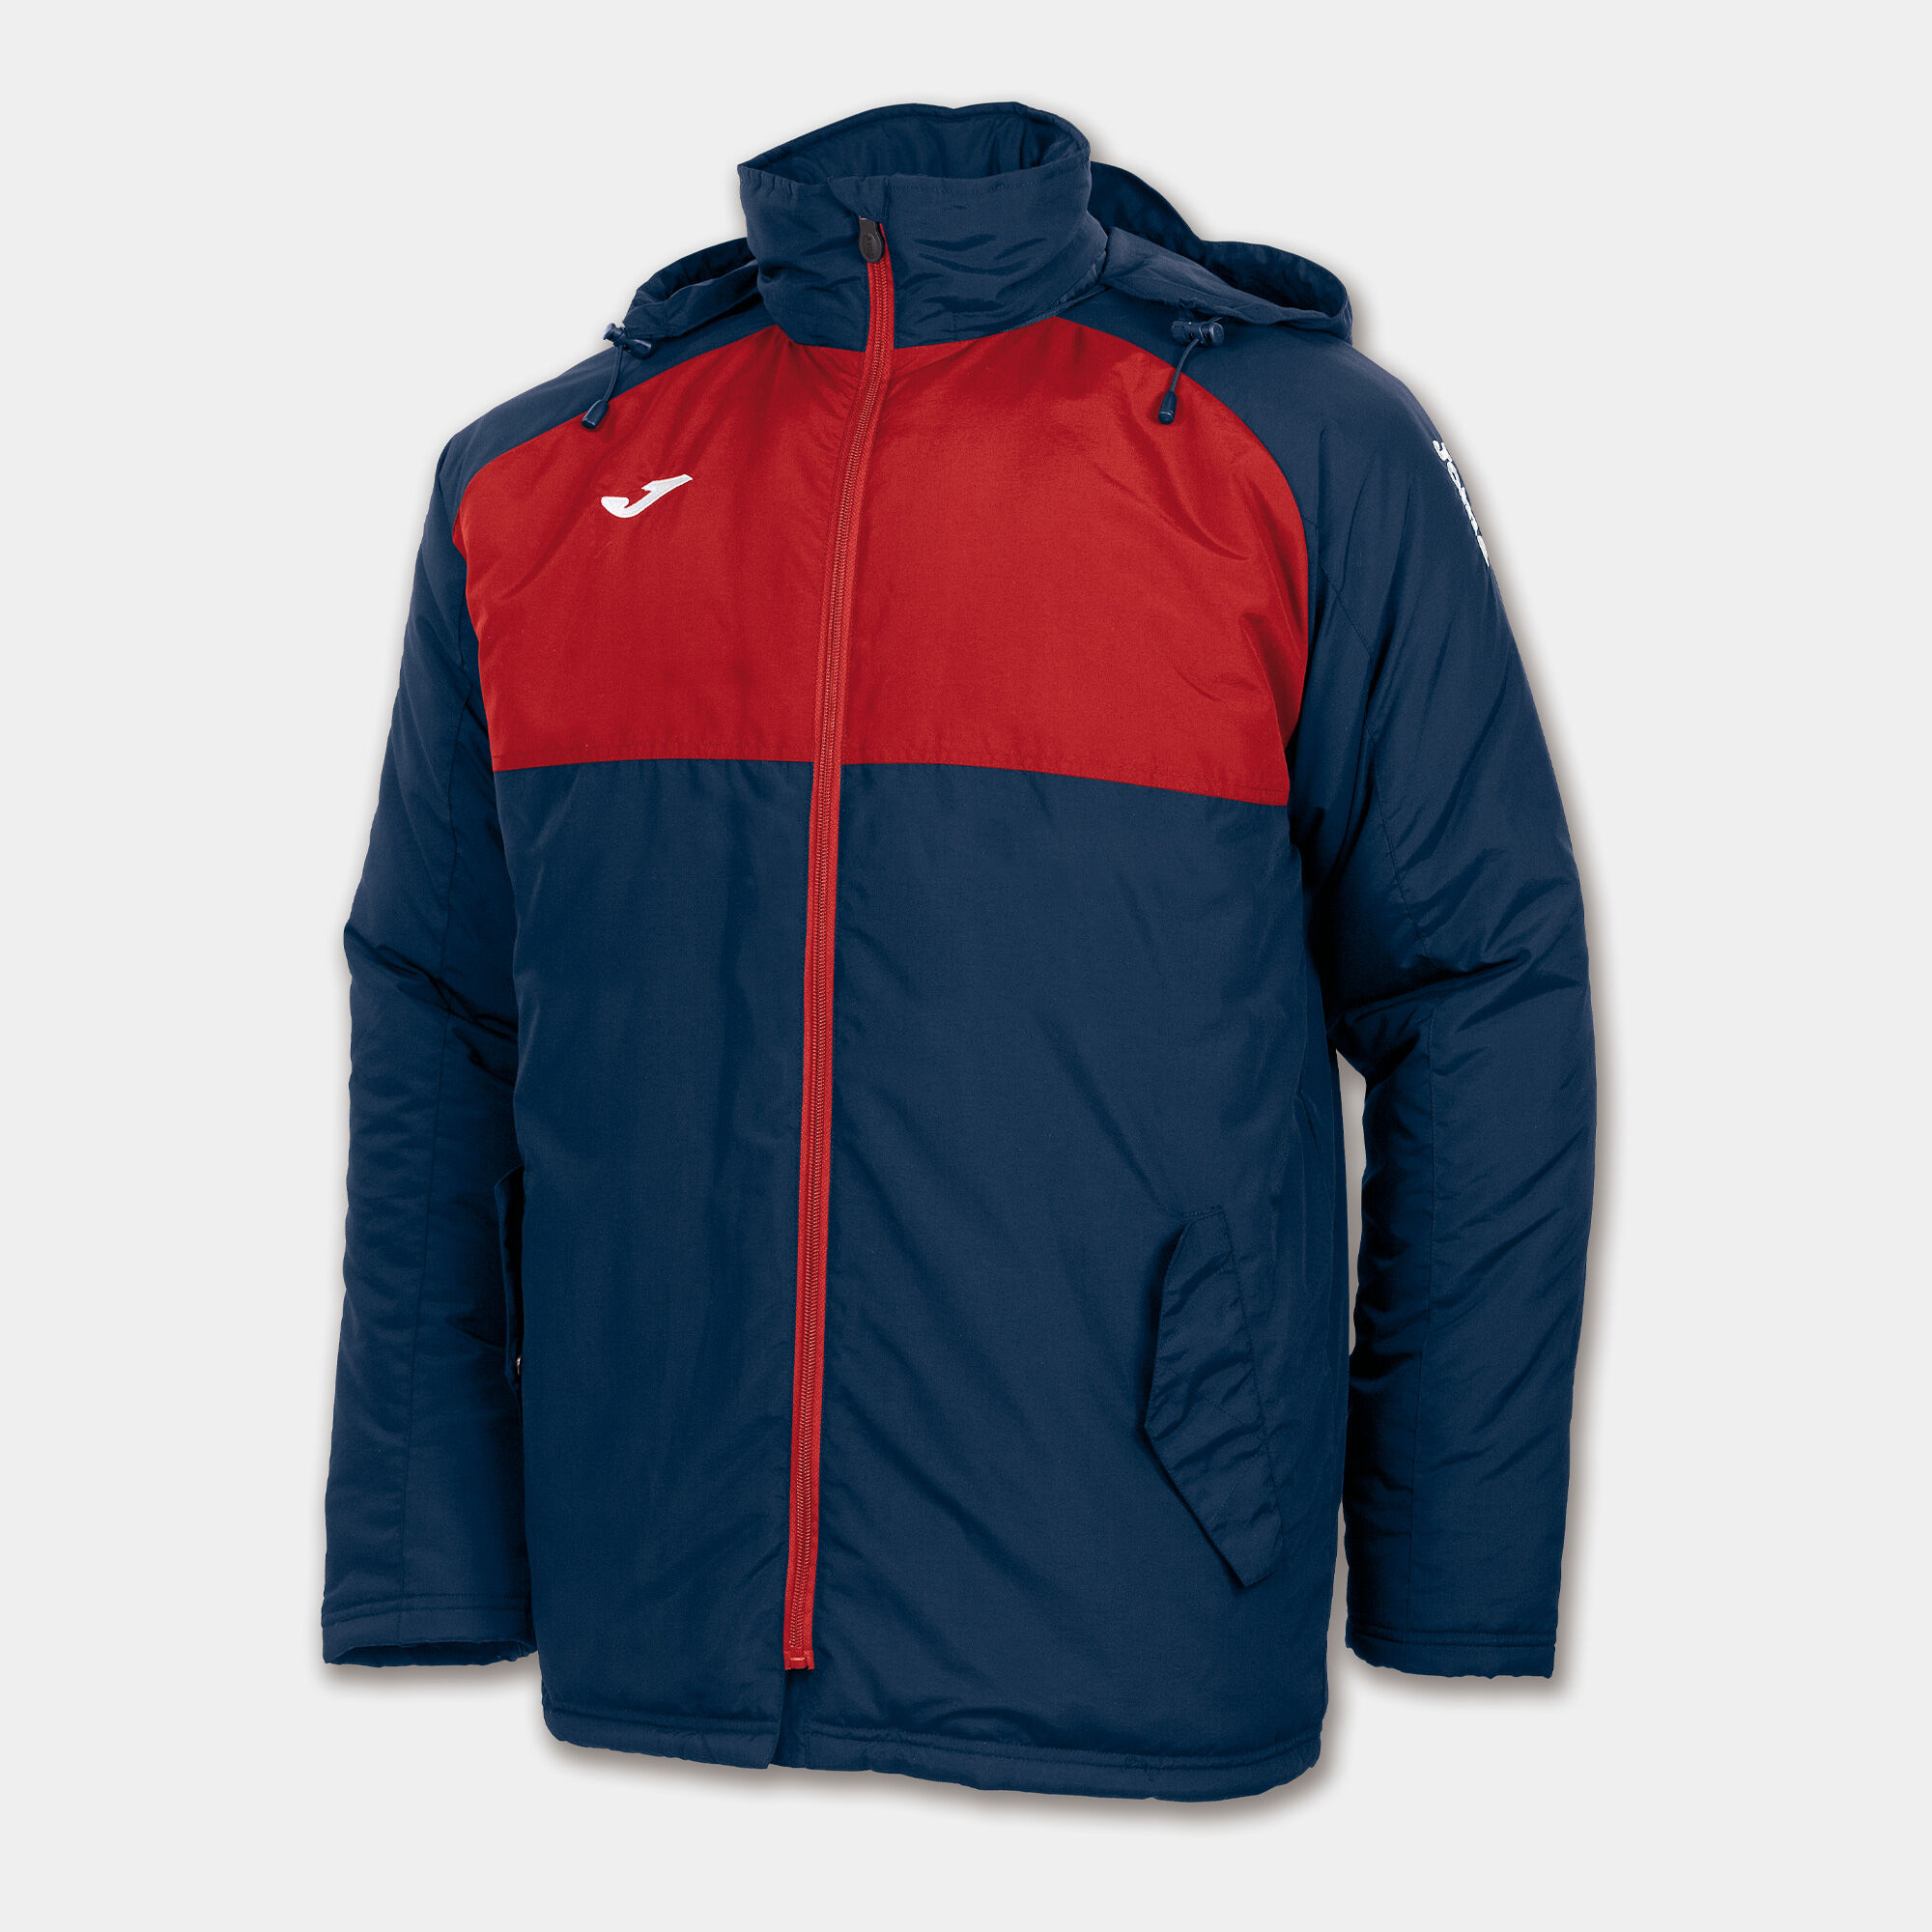 ANORAK HOMME ANDES BLEU MARINE ROUGE